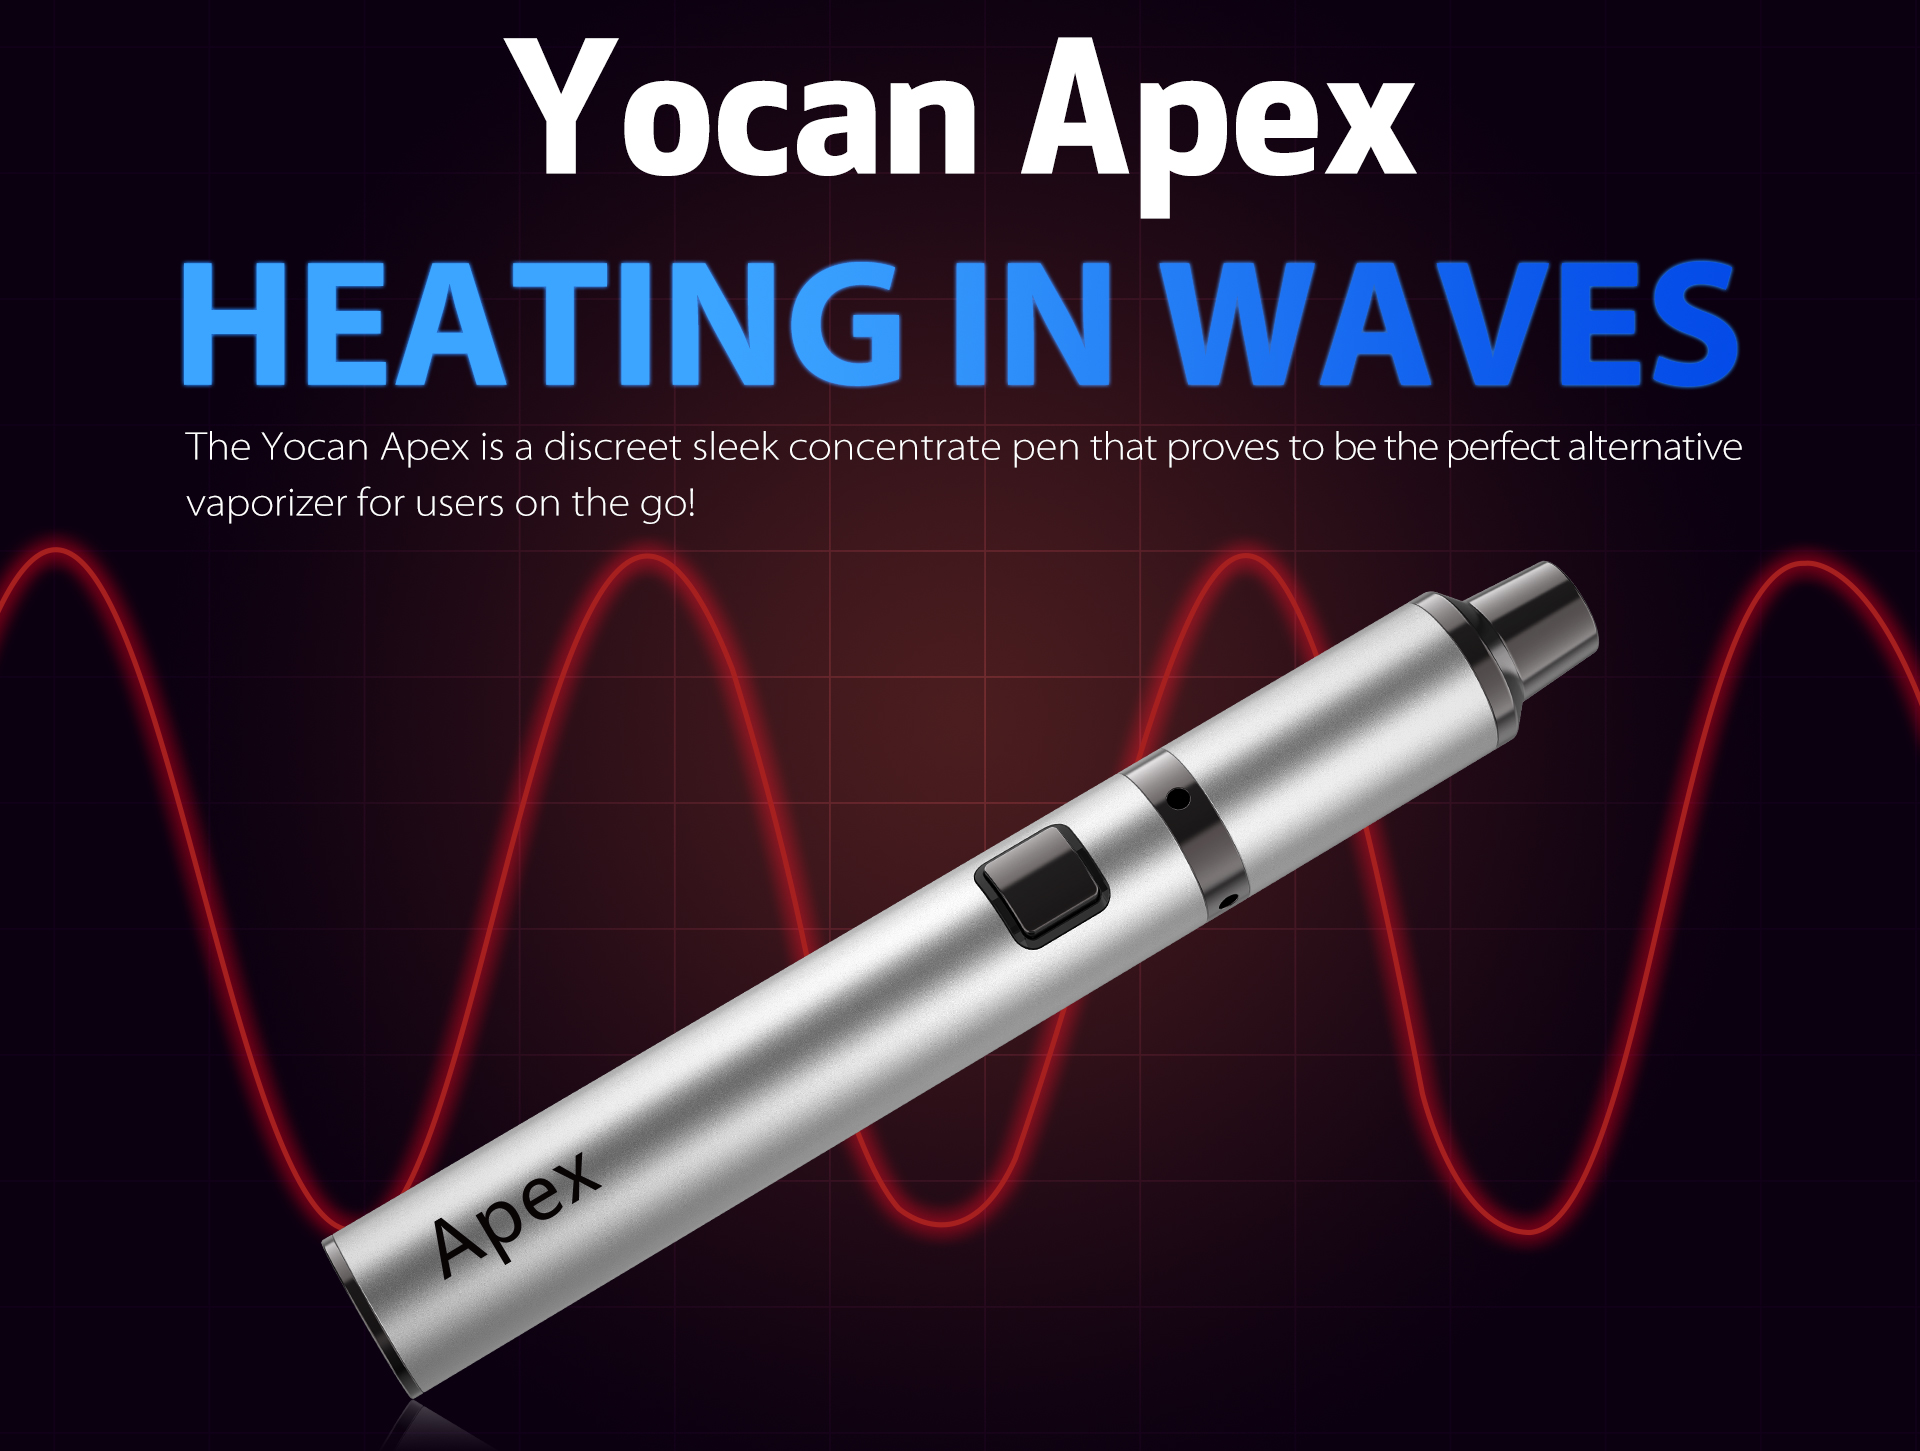 Yocan Apex concentrate vaporizer pen is dscreet sleek, perfect for on the go.